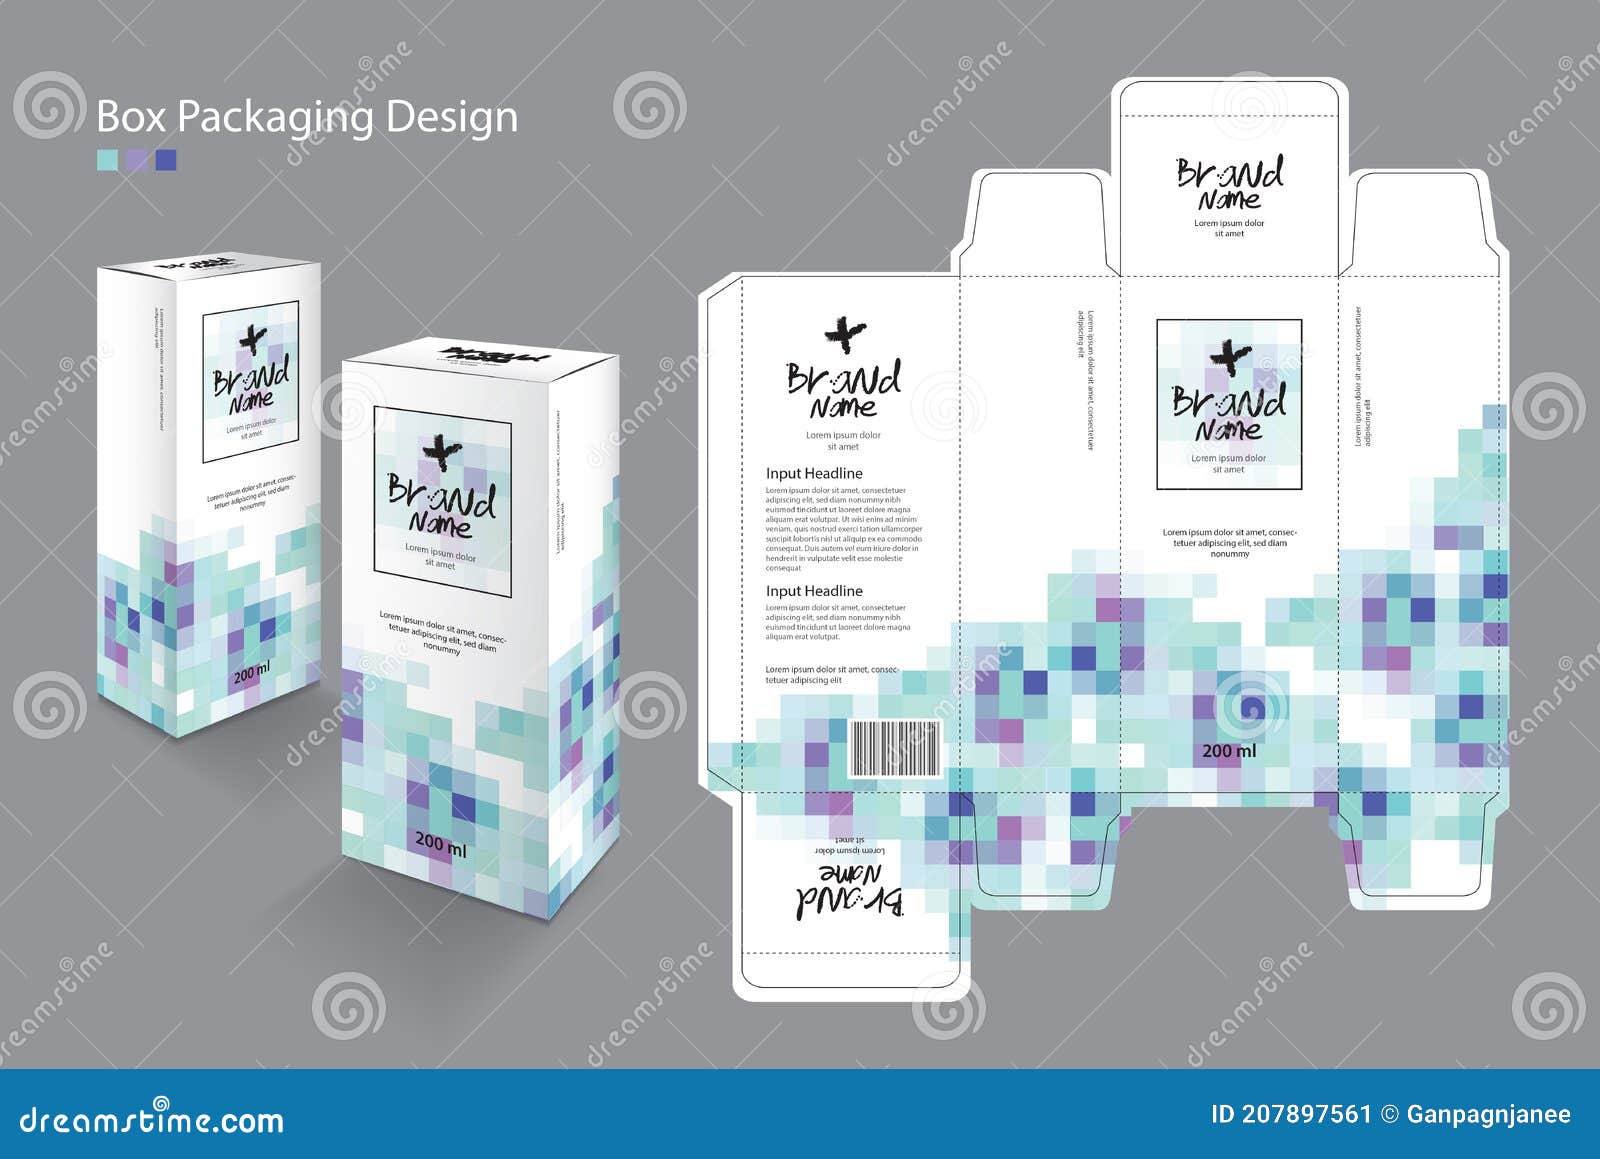 https://thumbs.dreamstime.com/z/packaging-box-packaging-design-template-d-box-mock-up-medicine-packaging-box-product-design-geometric-background-packaging-box-207897561.jpg